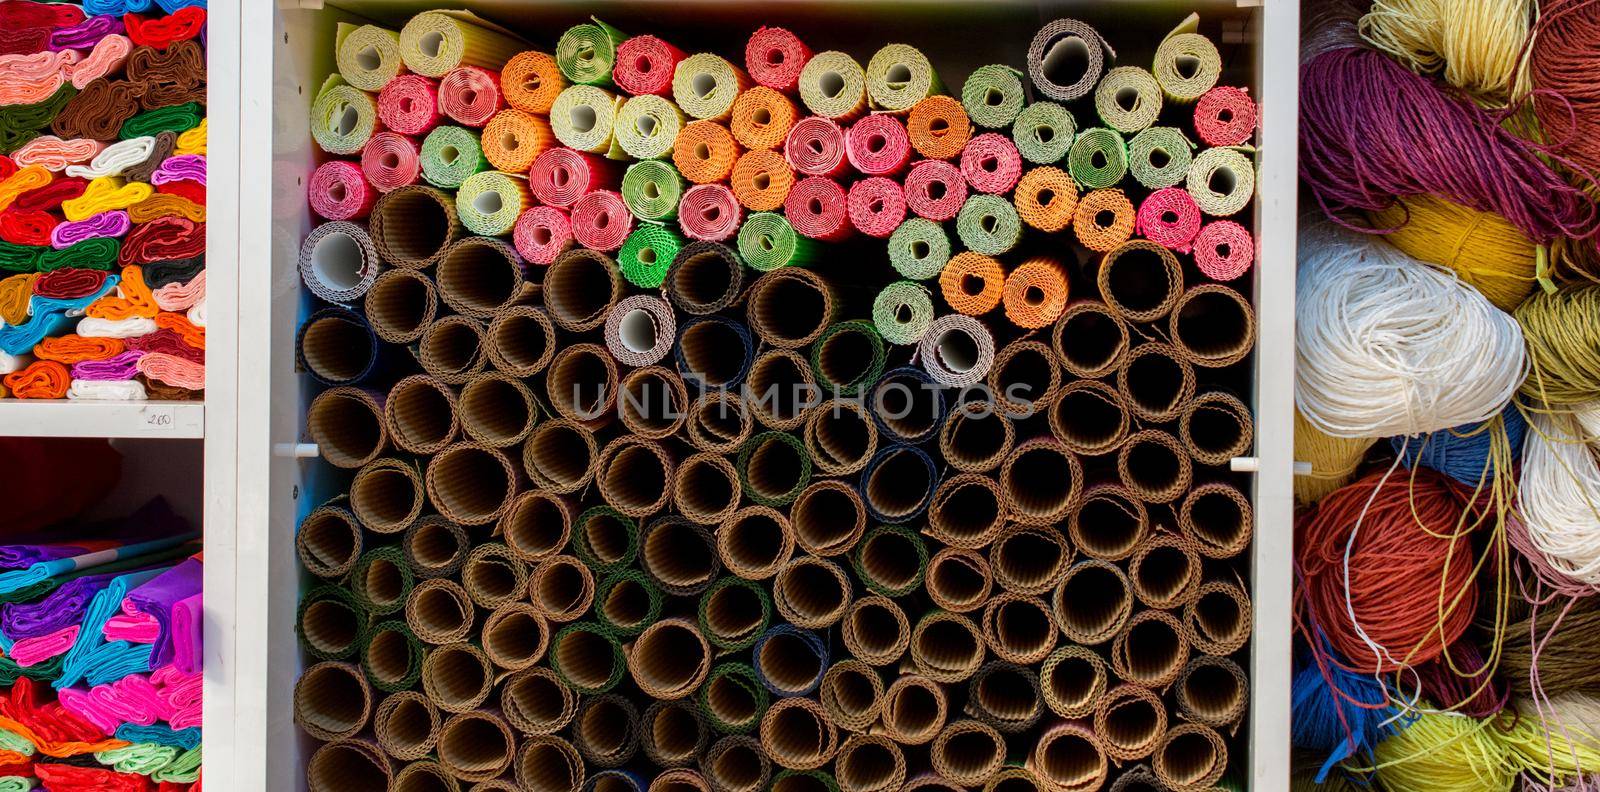 Dozens of colorful paper rolls in the view